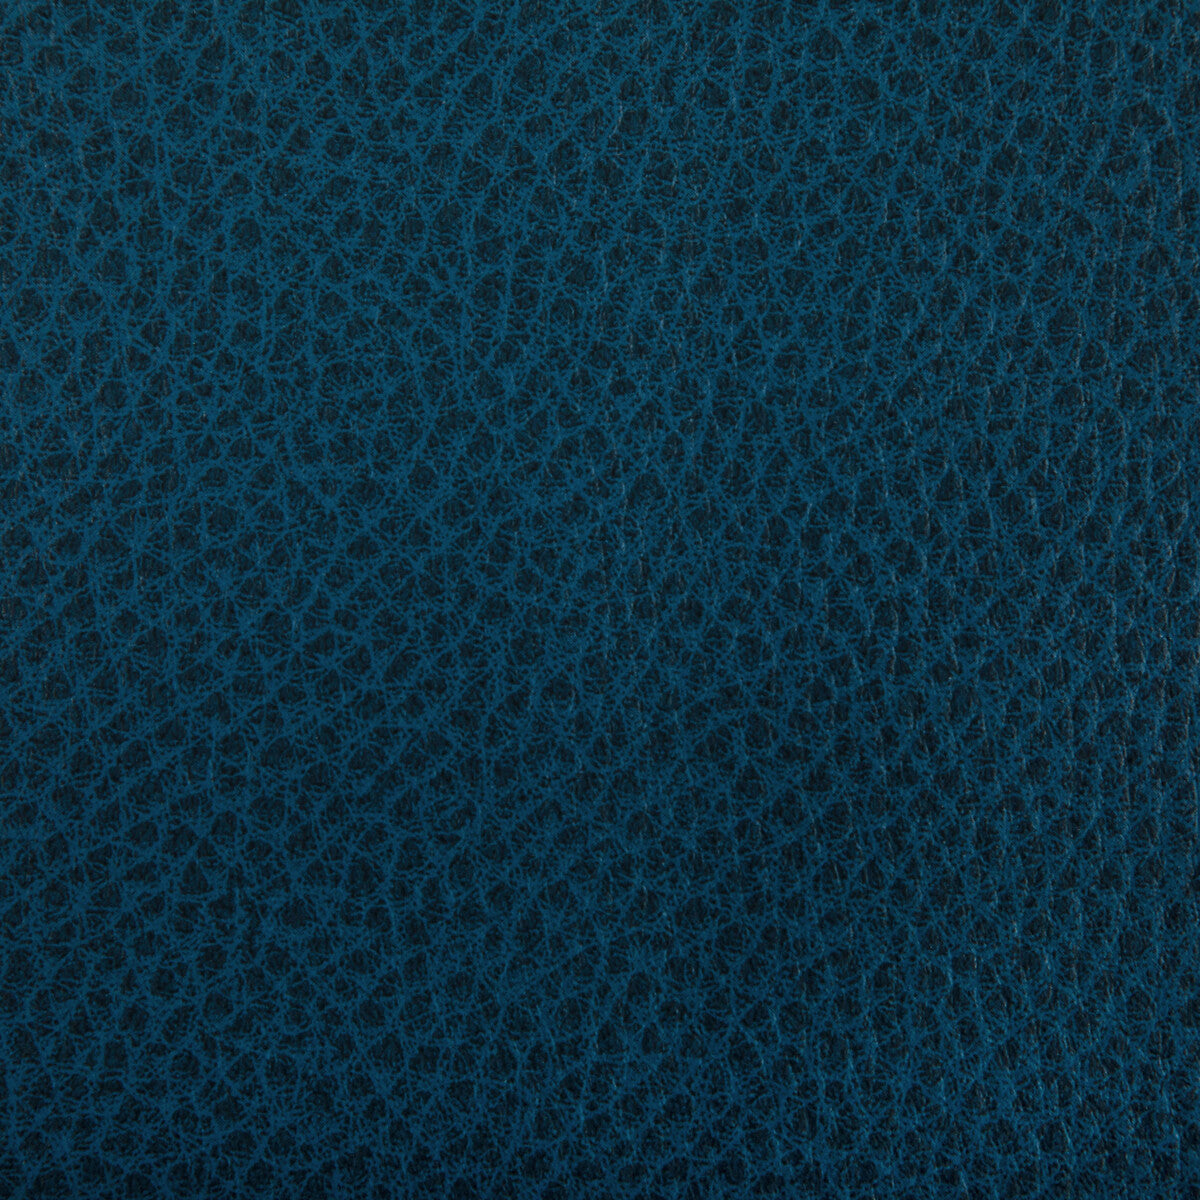 Woolf fabric in denim color - pattern WOOLF.5.0 - by Kravet Contract